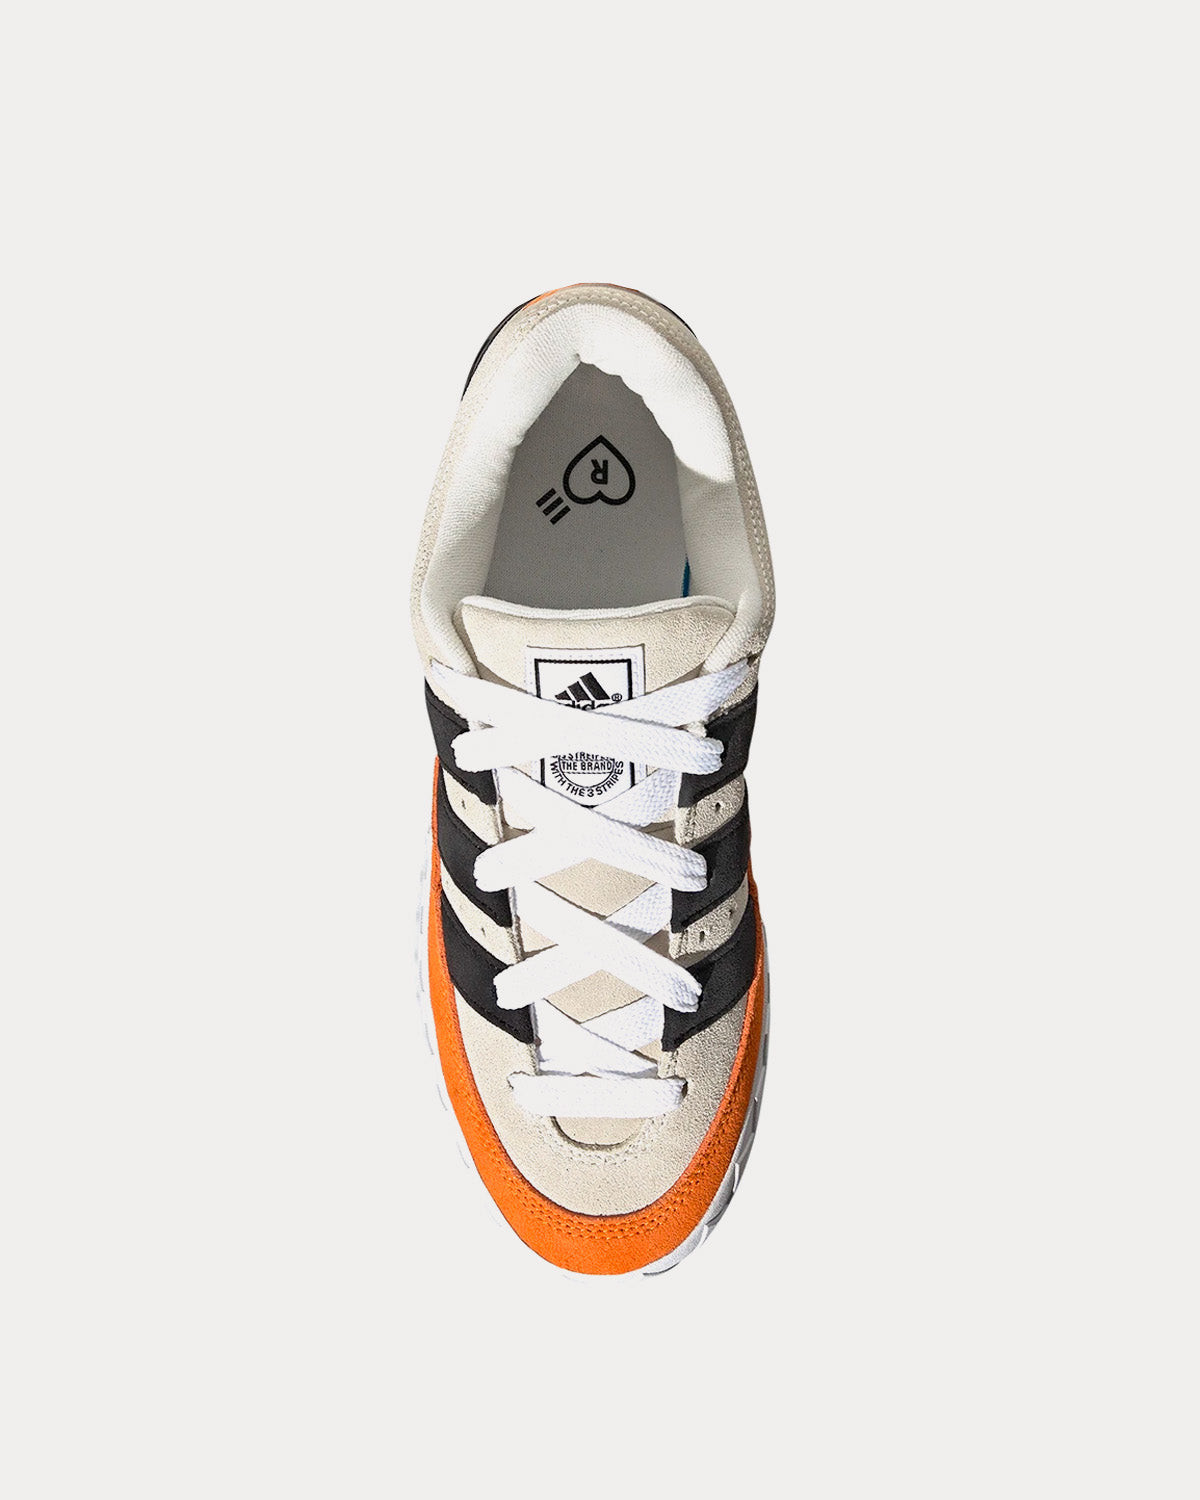 Adidas x Human Made - Adimatic Off White / Core Black / Bright Orange Low Top Sneakers